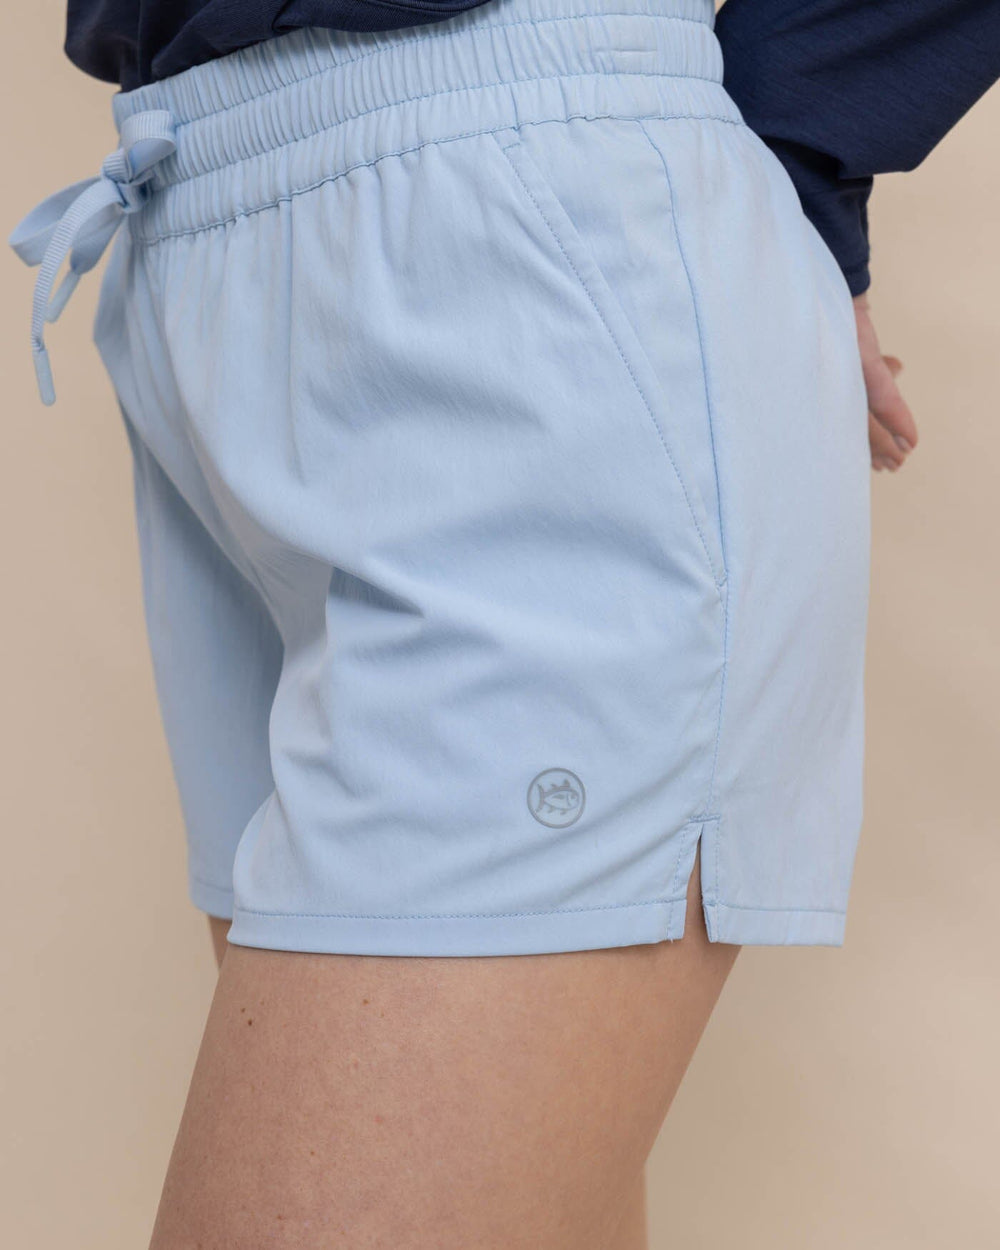 The detail view of the Southern Tide Sammie Intercoastal Performance Short by Southern Tide - Clearwater Blue